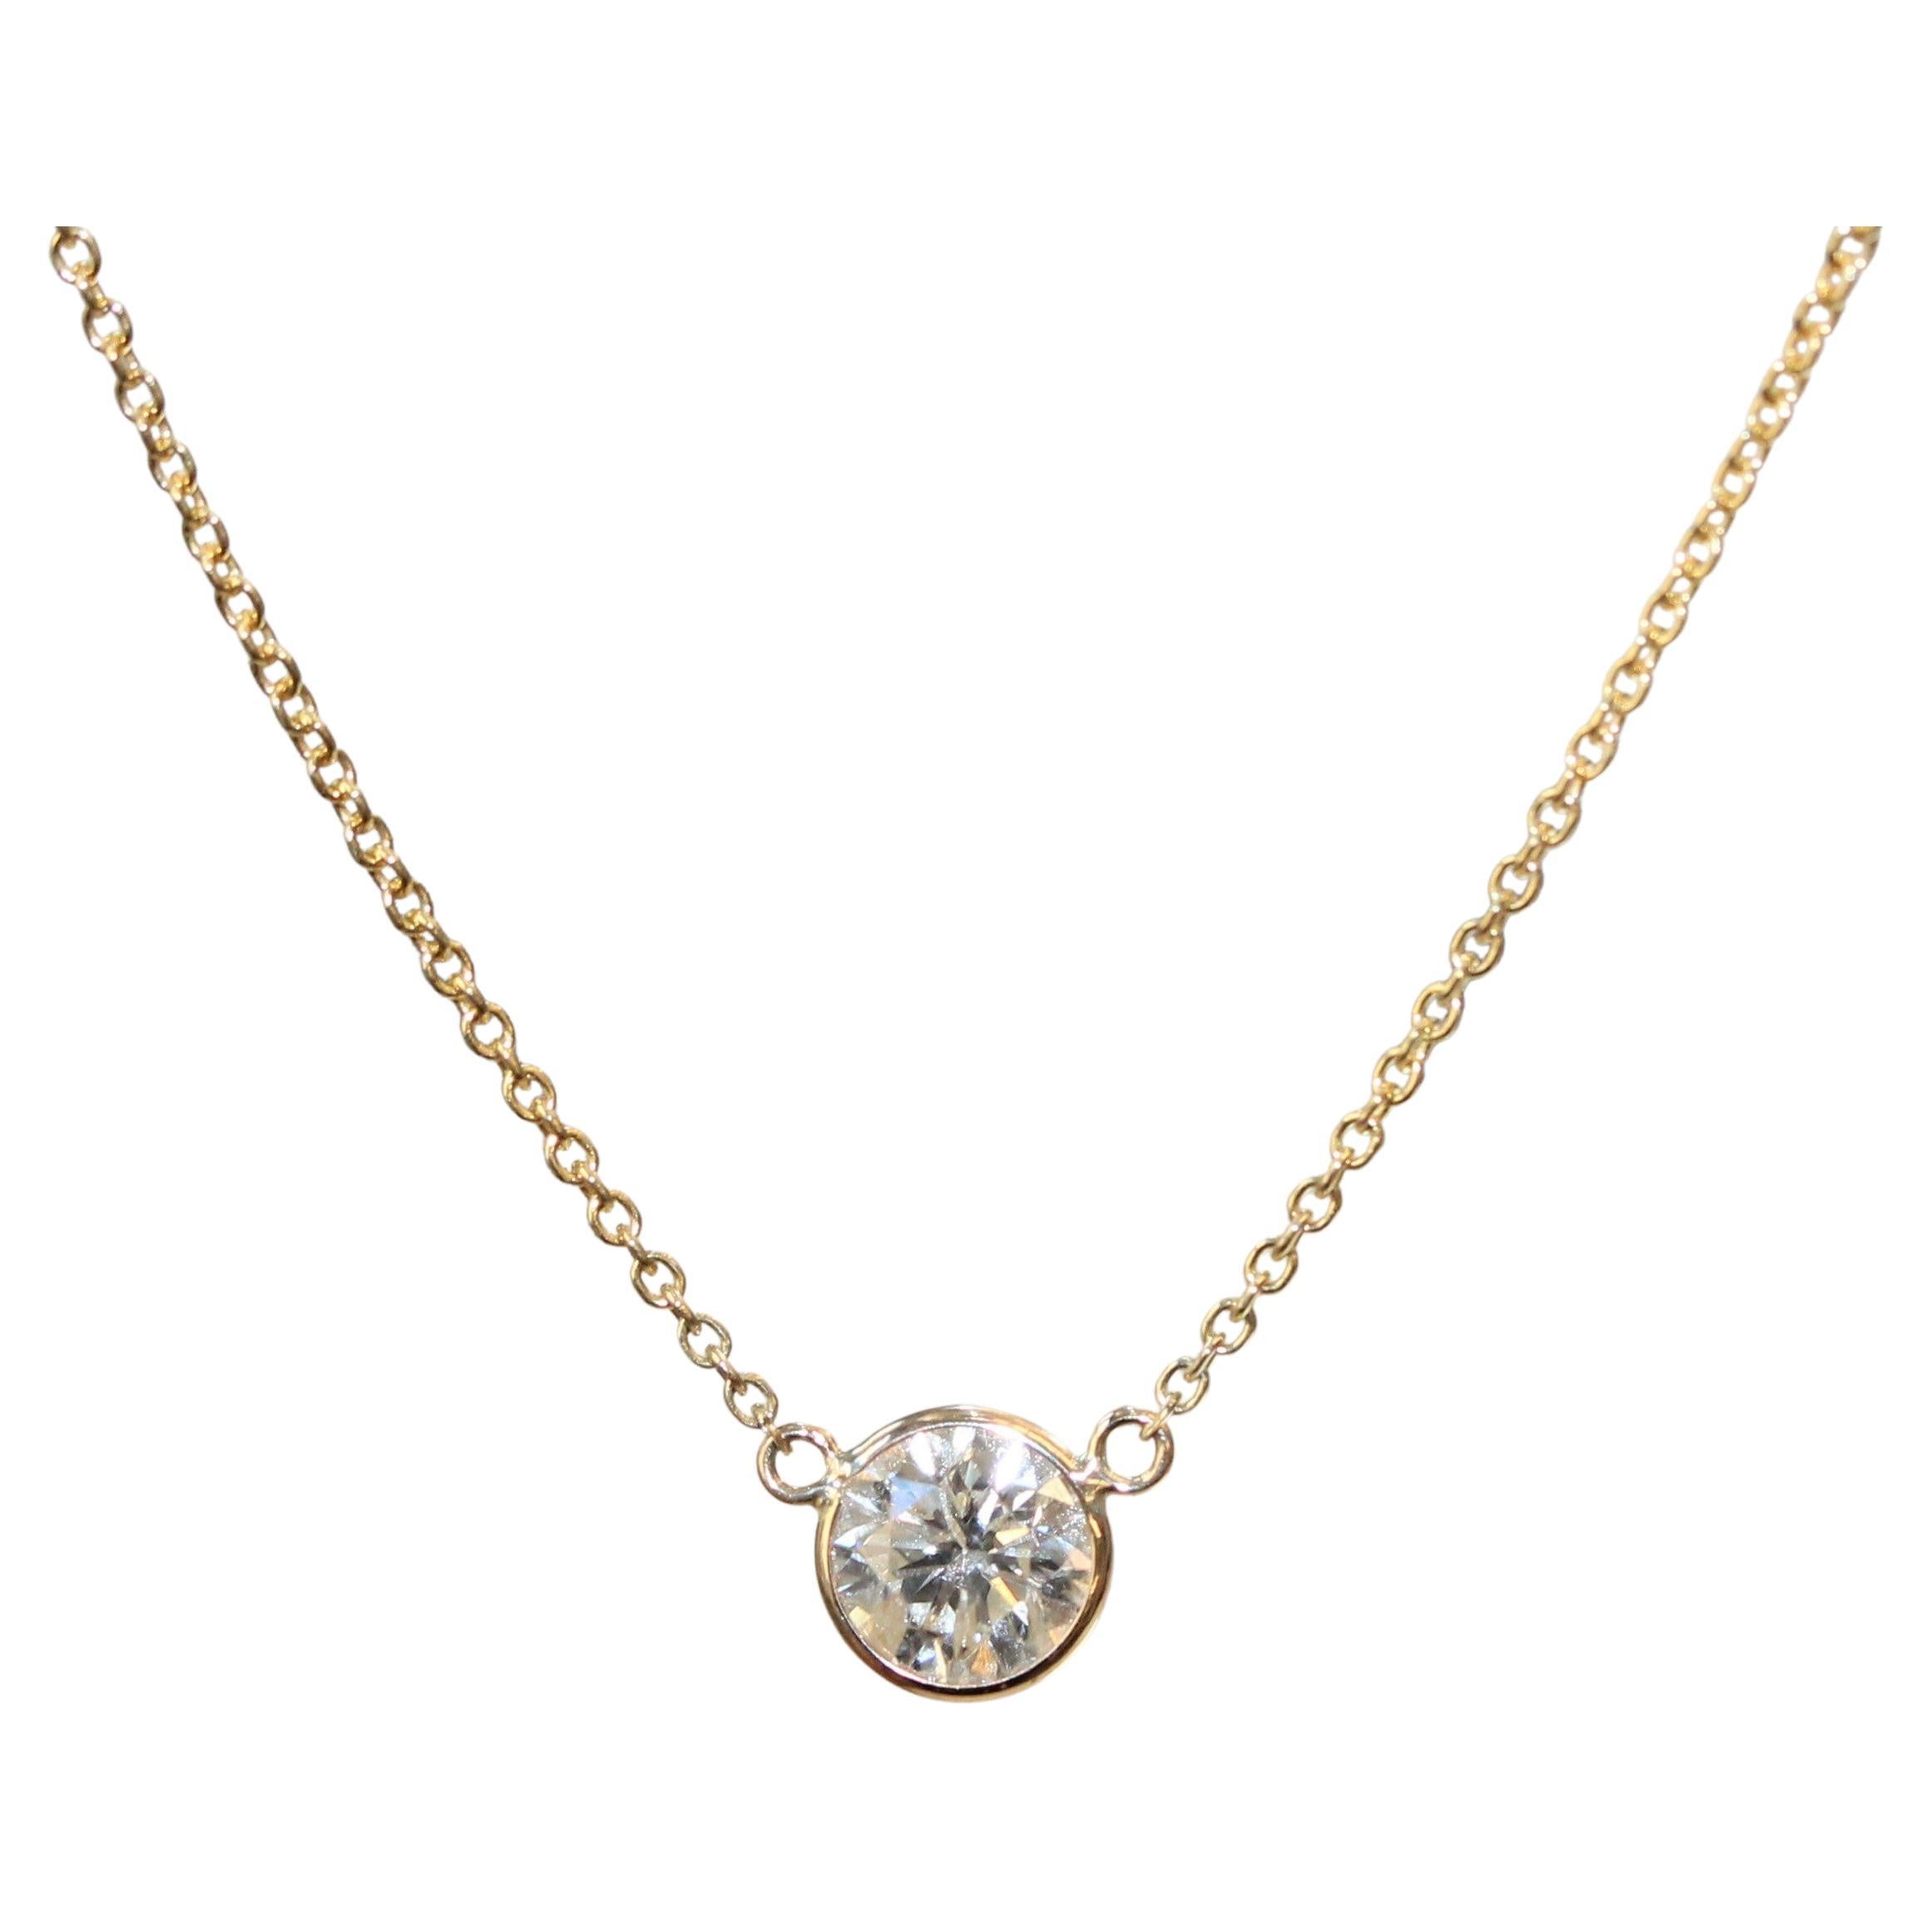 1.00 Carat Round Diamond Handmade Solitaire Necklace In 14k Yellow Gold